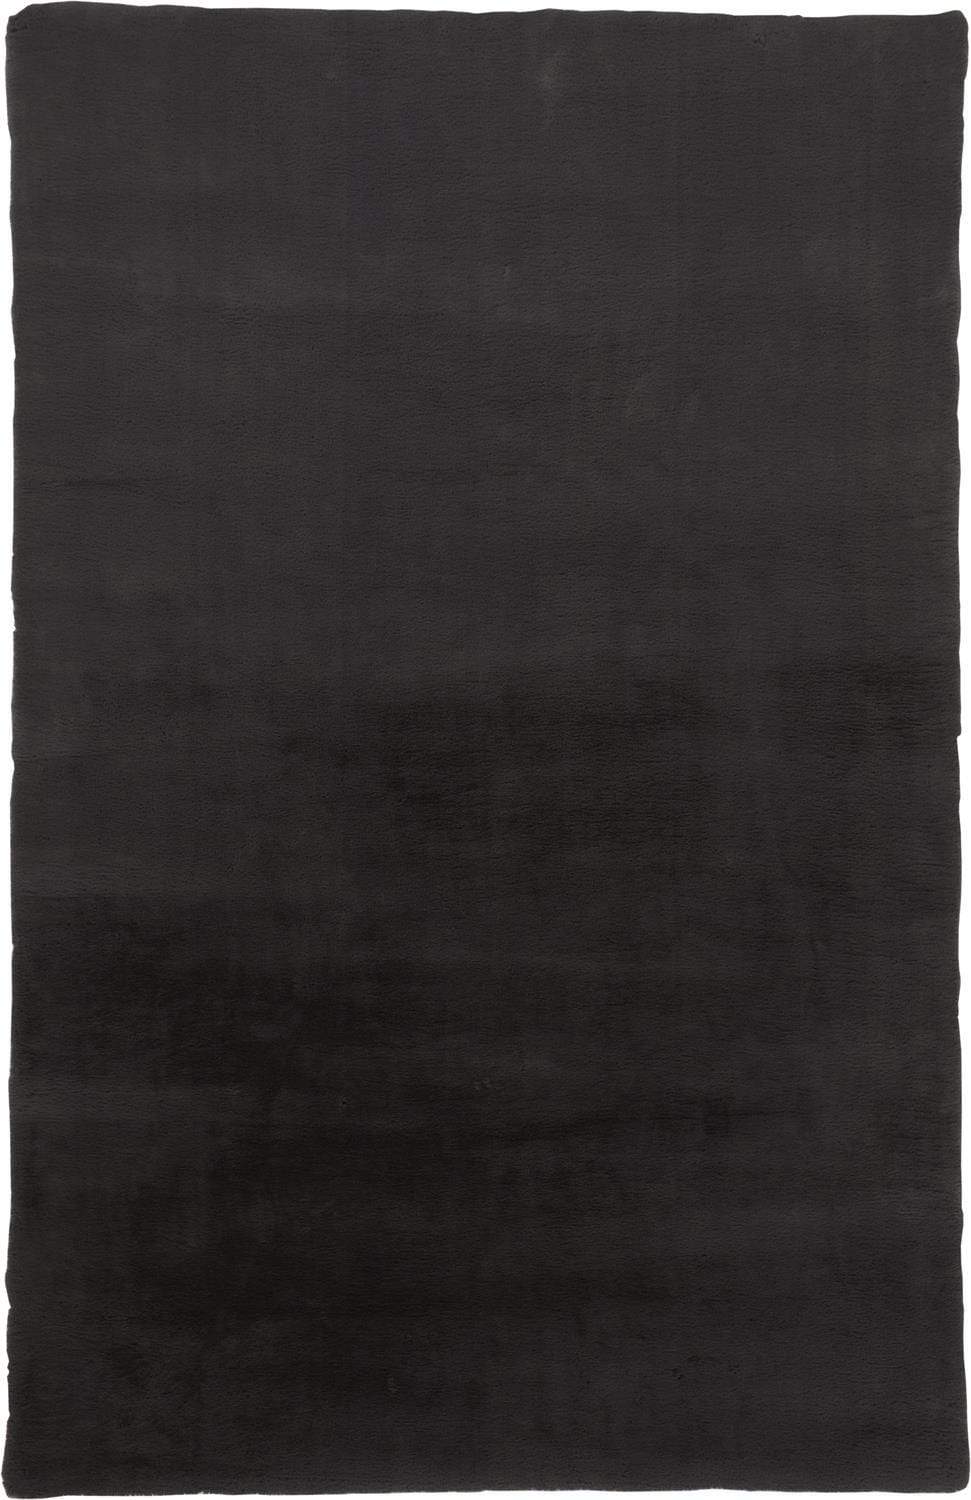 Feizy Feizy Luxe Velour Glamorous Ultra-Soft Shag Rug - Jet Black - Available in 6 Sizes 4' x 6' LXV4506FSLT000C00